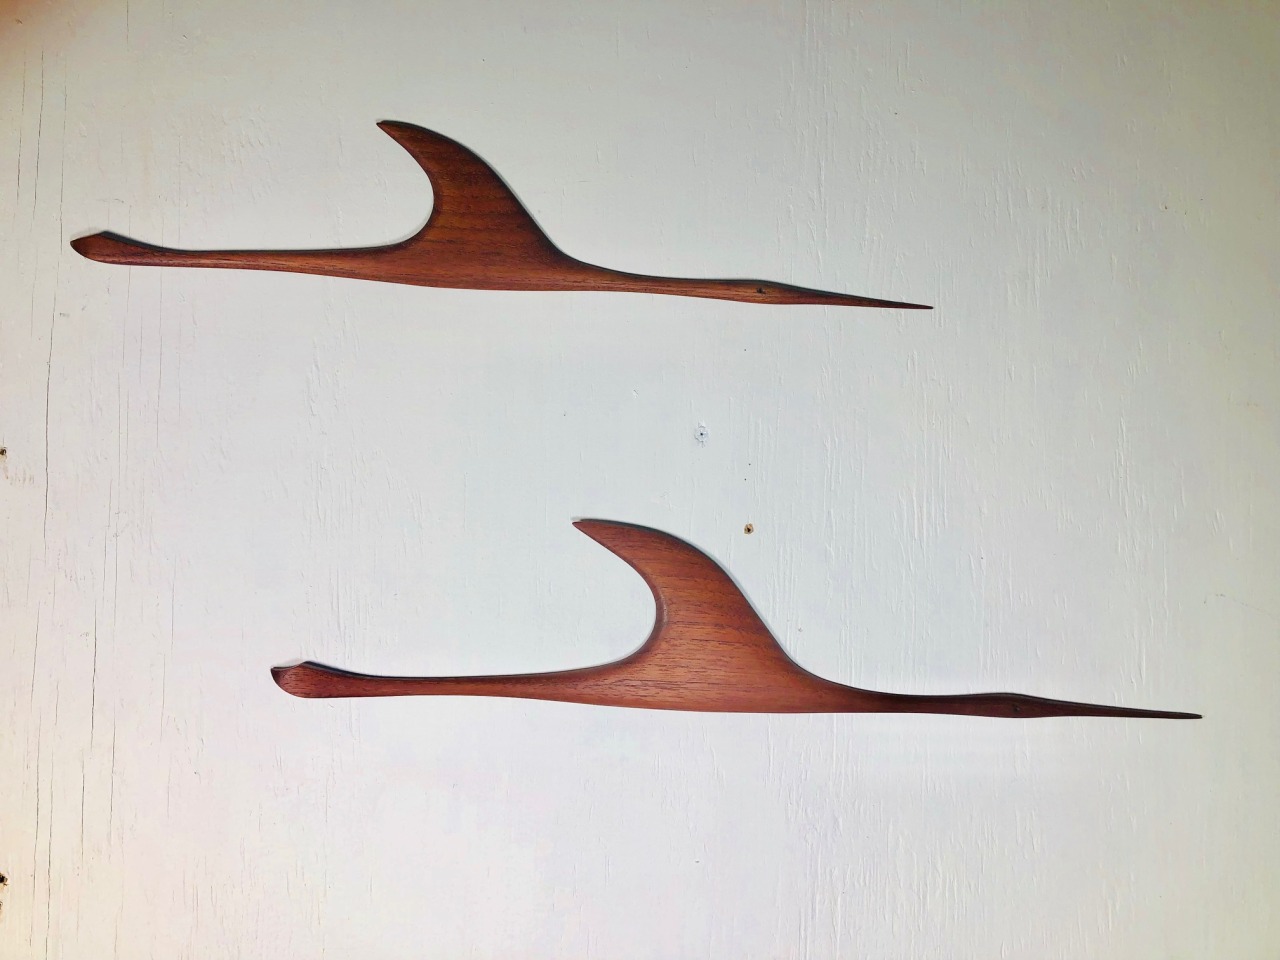 <p>Gorgeous pair of German teak cranes from the 1960s.<br/>Larger crane is 21" long and 4" wide at the widest point.<br/>Smaller crane is 18.5" long and 3.5" wide.</p>